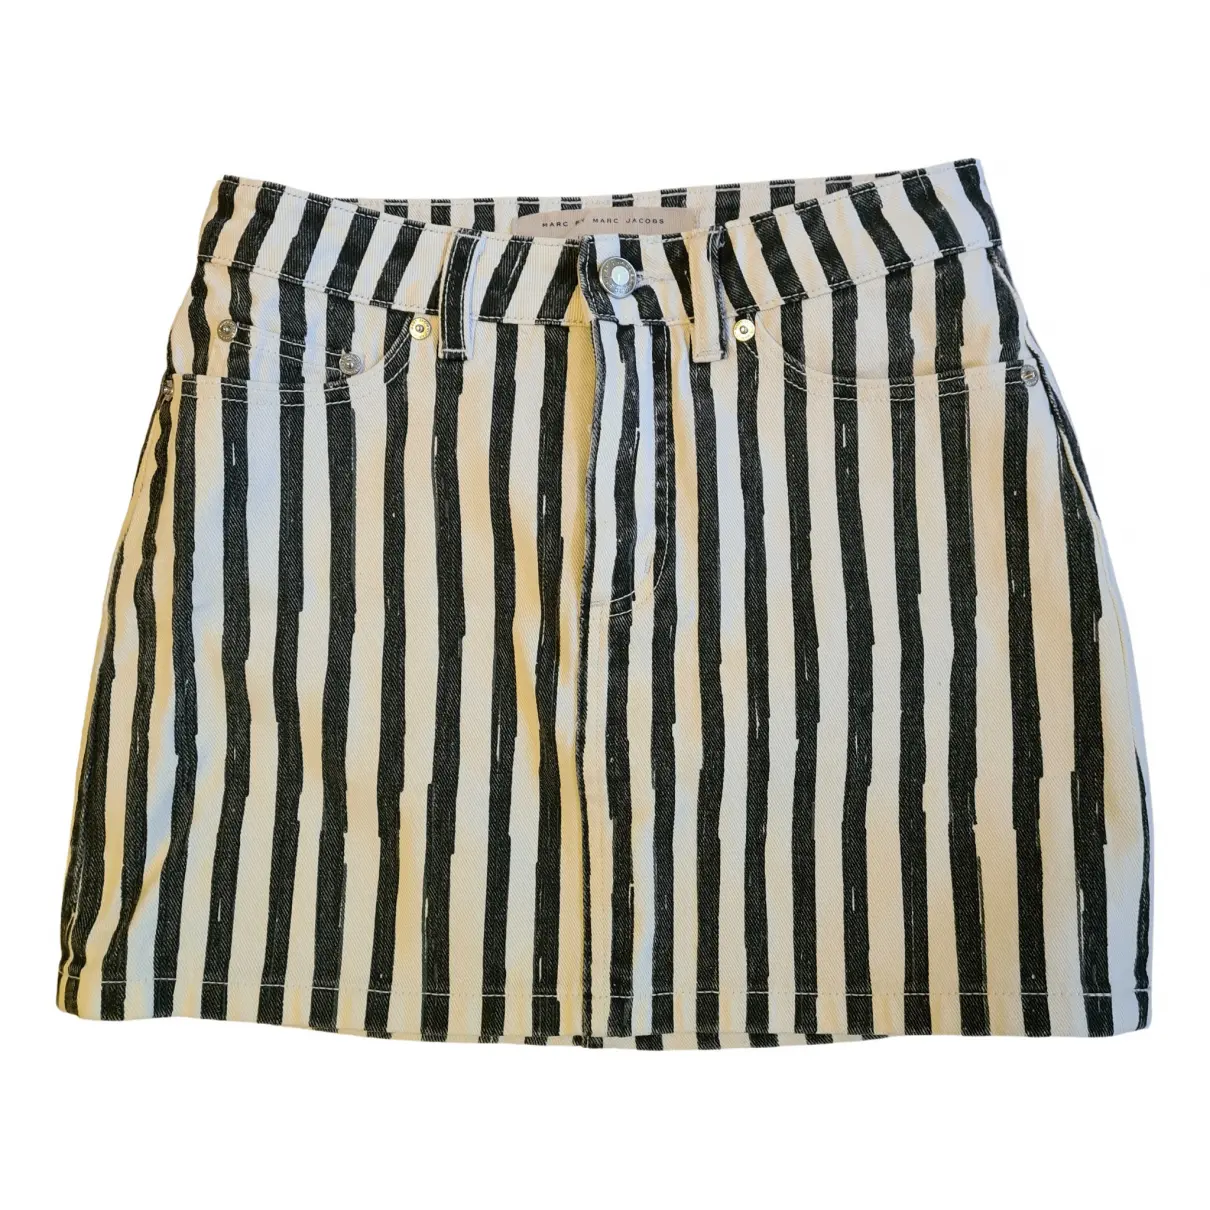 Mini skirt Marc by Marc Jacobs